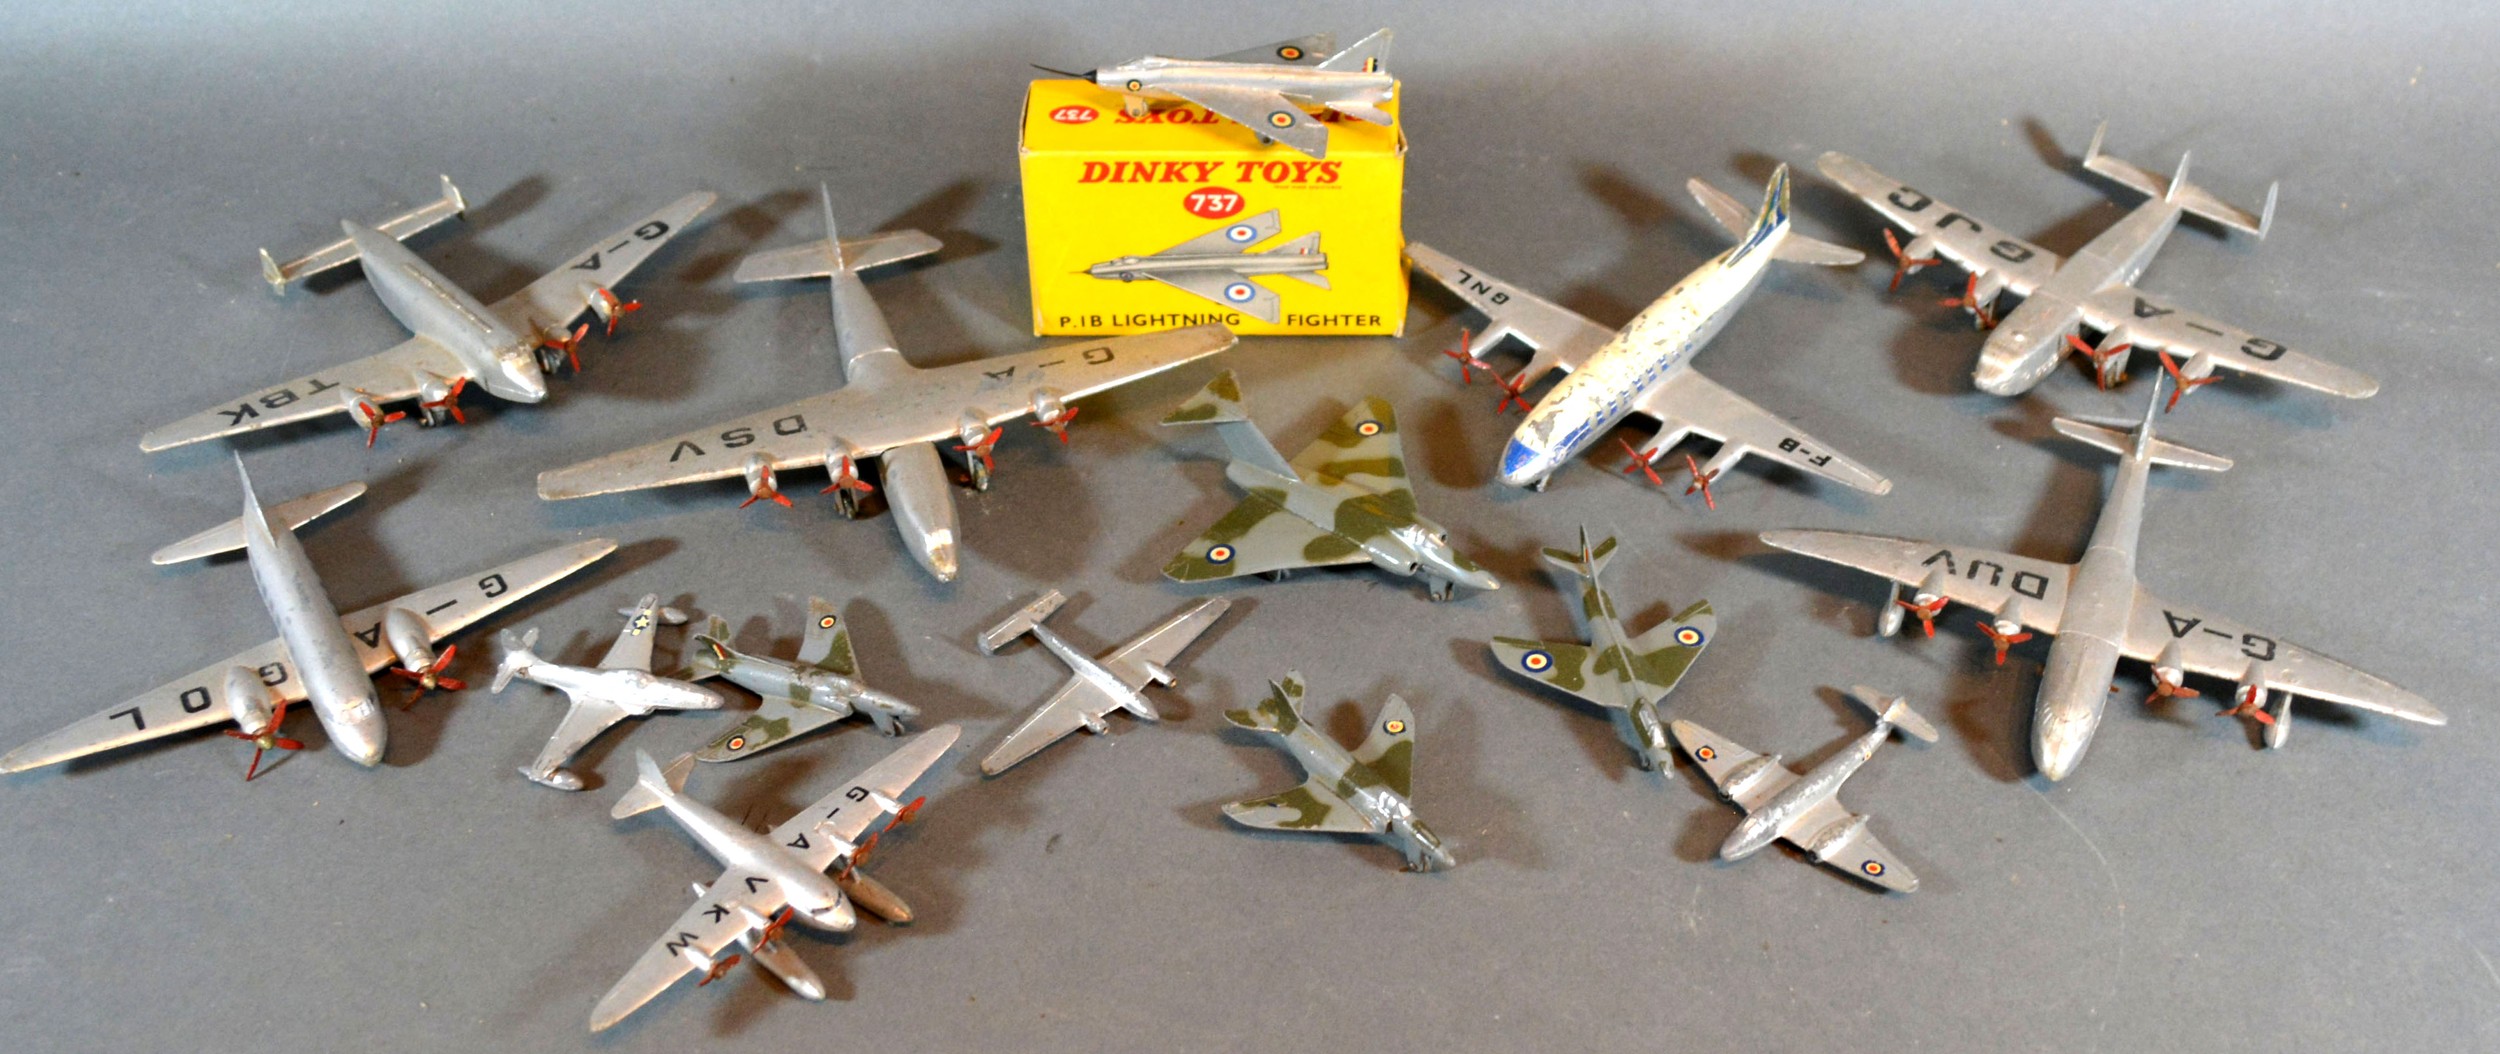 A Dinky Toys Empire Flying Boat together with fourteen other Dinky Toys models in the form of